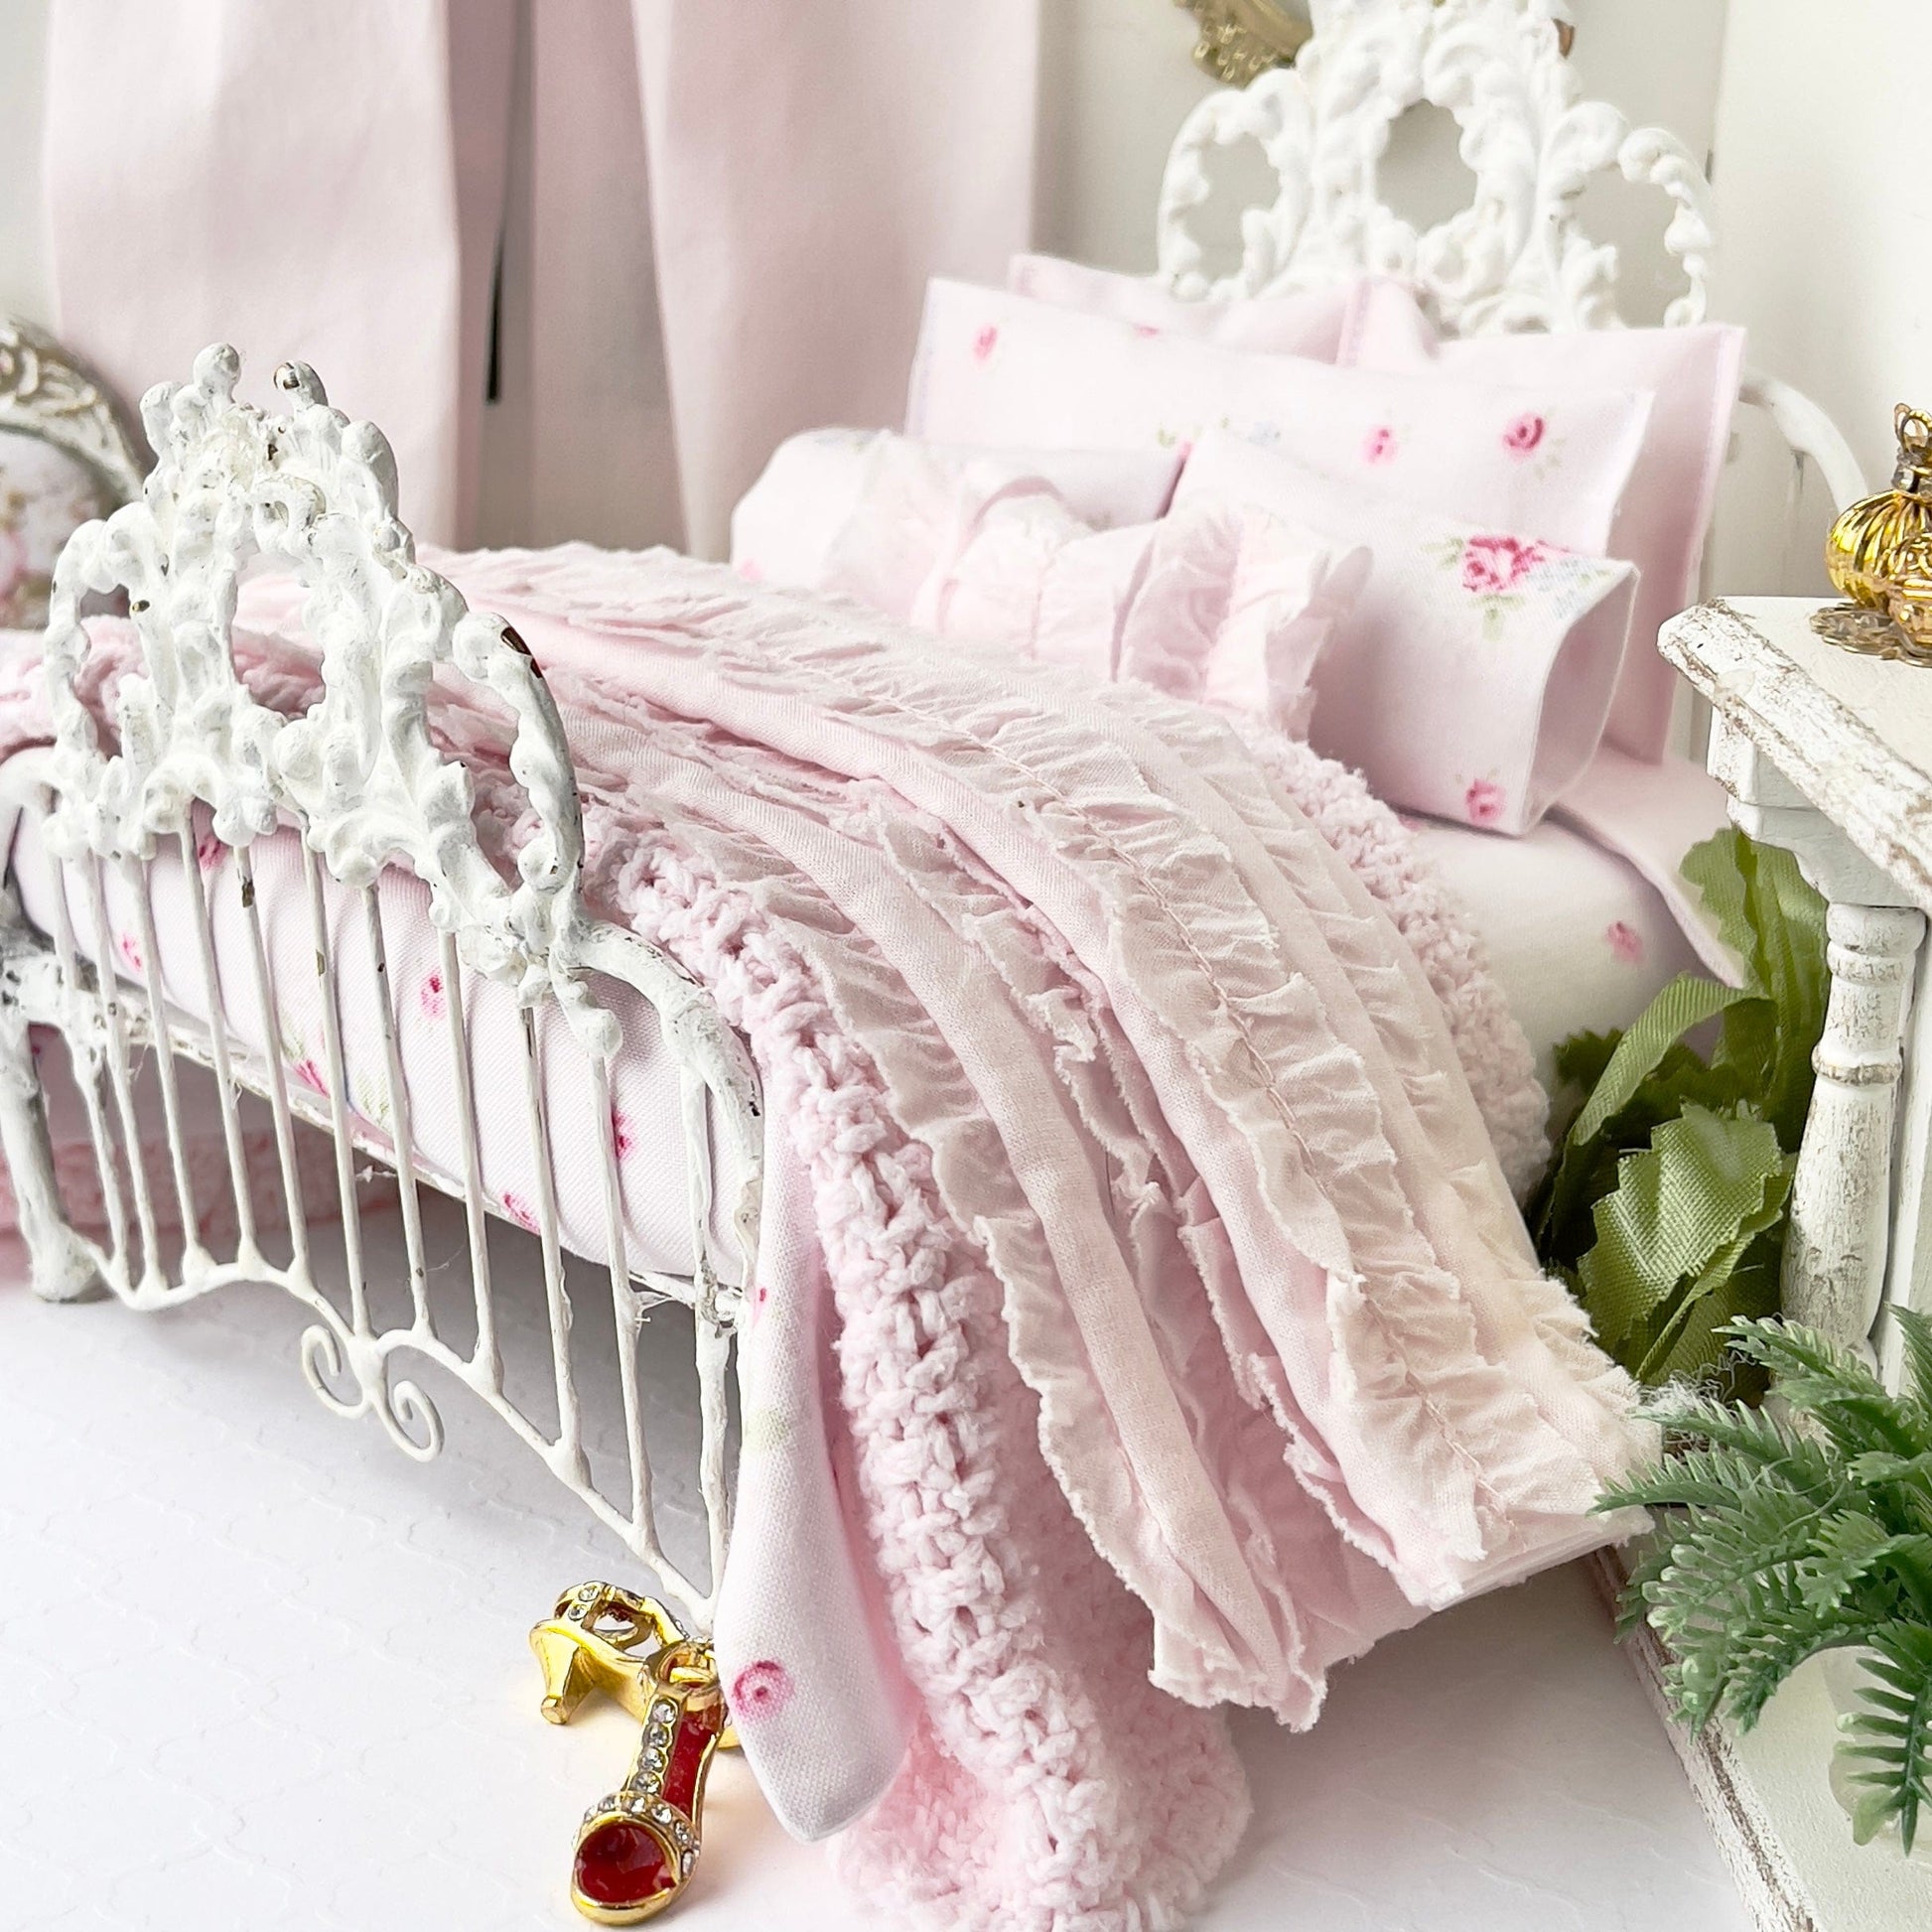 Chantallena Doll House Double Bedding Set Copy of Shabby Cottage |  Nine Piece Shabby Dark Pink Roses Cotton Bedding Set with Pink Chenille Throw | Sandy